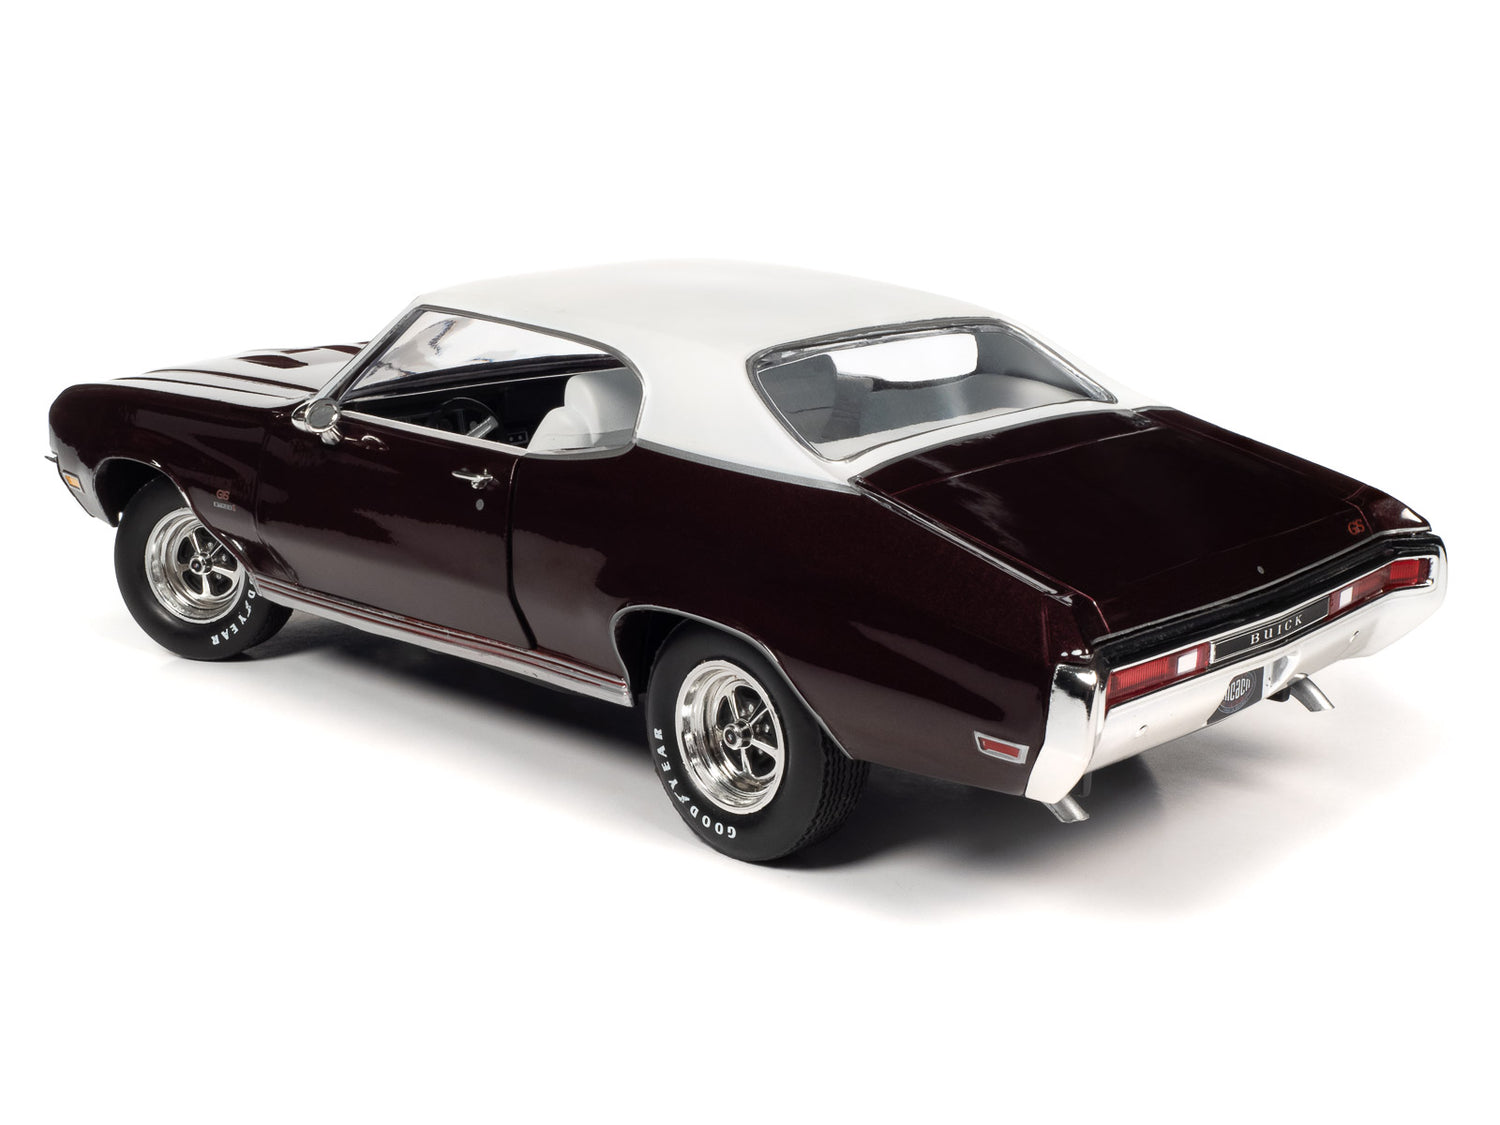 American Muscle 1970 Buick GS Stage 1 Hardtop (MCACN) 1:18 Scale Diecast